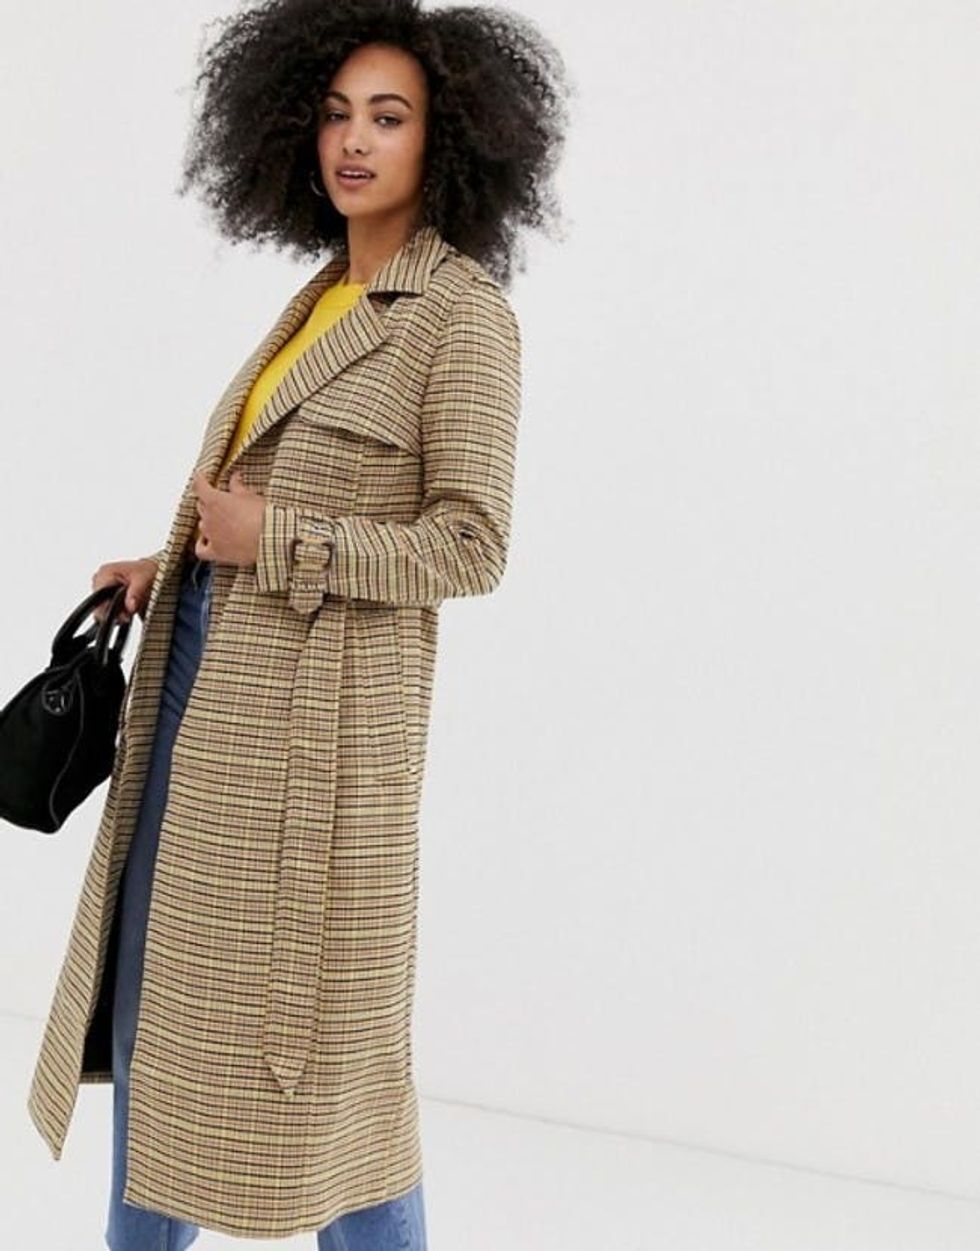 19 Not-So-Basic Spring Trench Coats Under $150 - Brit + Co